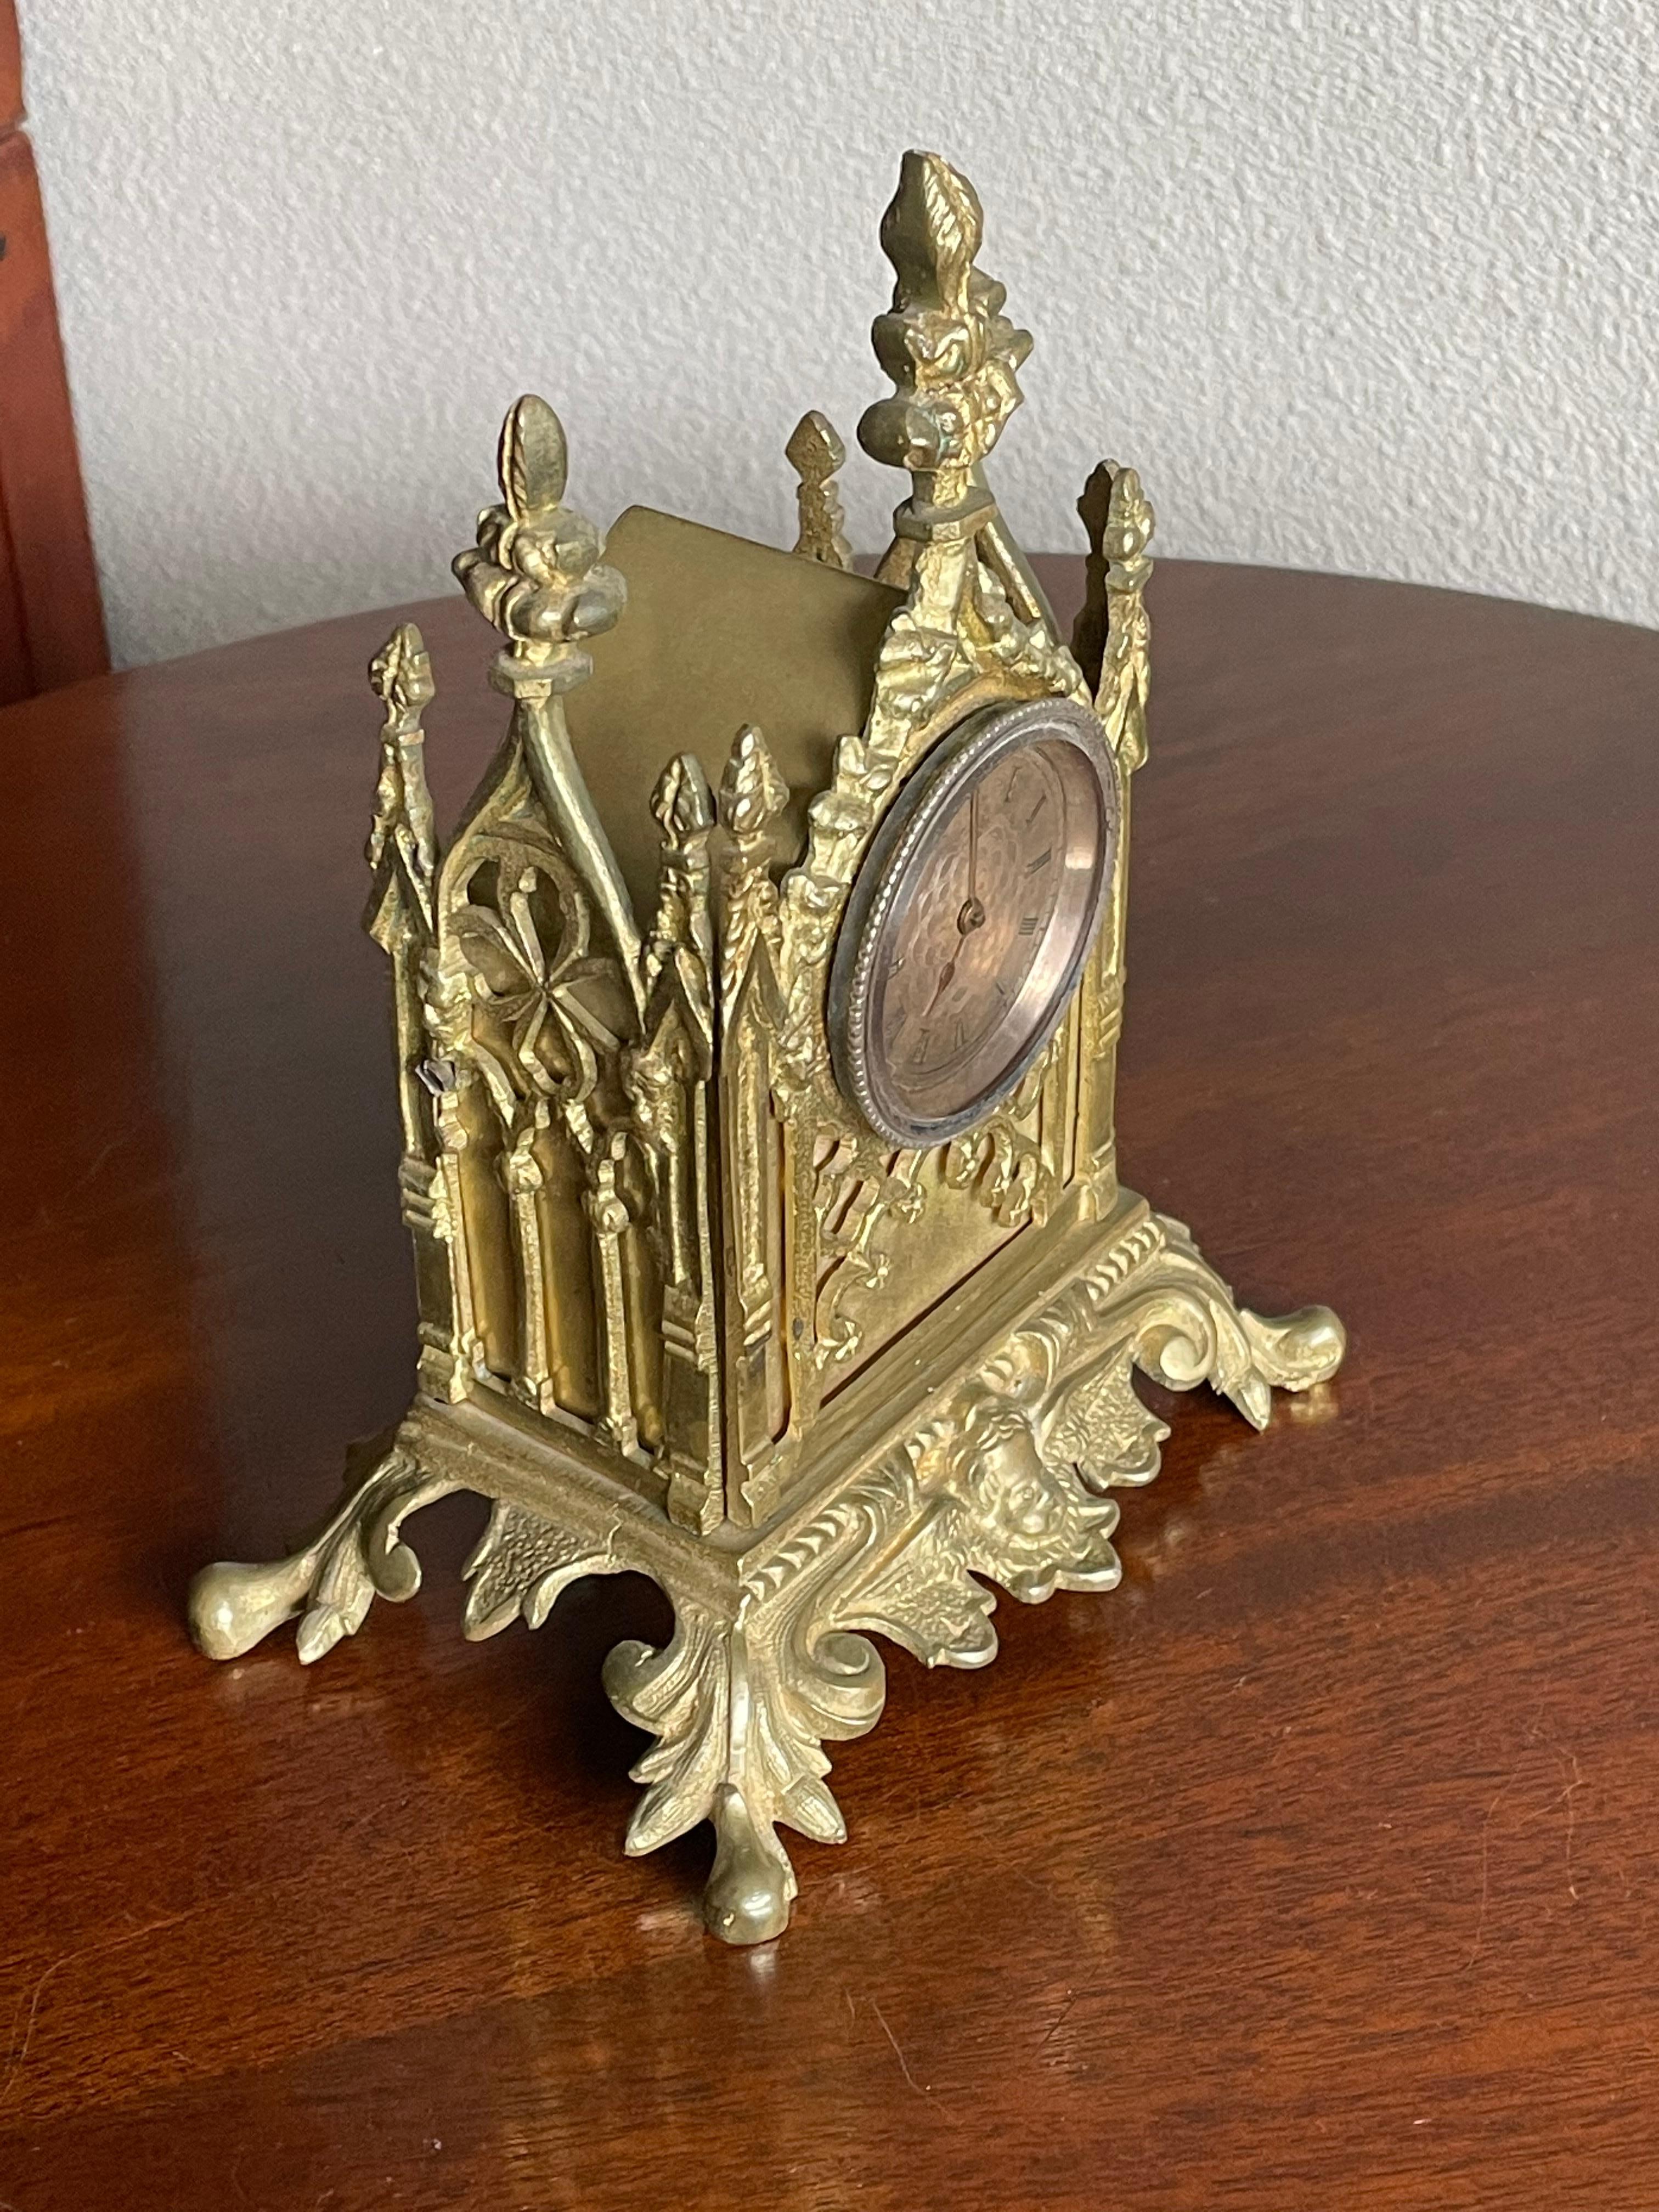 Small Gothic table clock with gilt bronze (or possibly golden) pocket watch by John Worboys of London, 1780-1810.

We know too little about antique pocket watches to be able to tell you if the pocket watch inside this unique bronze table clock is